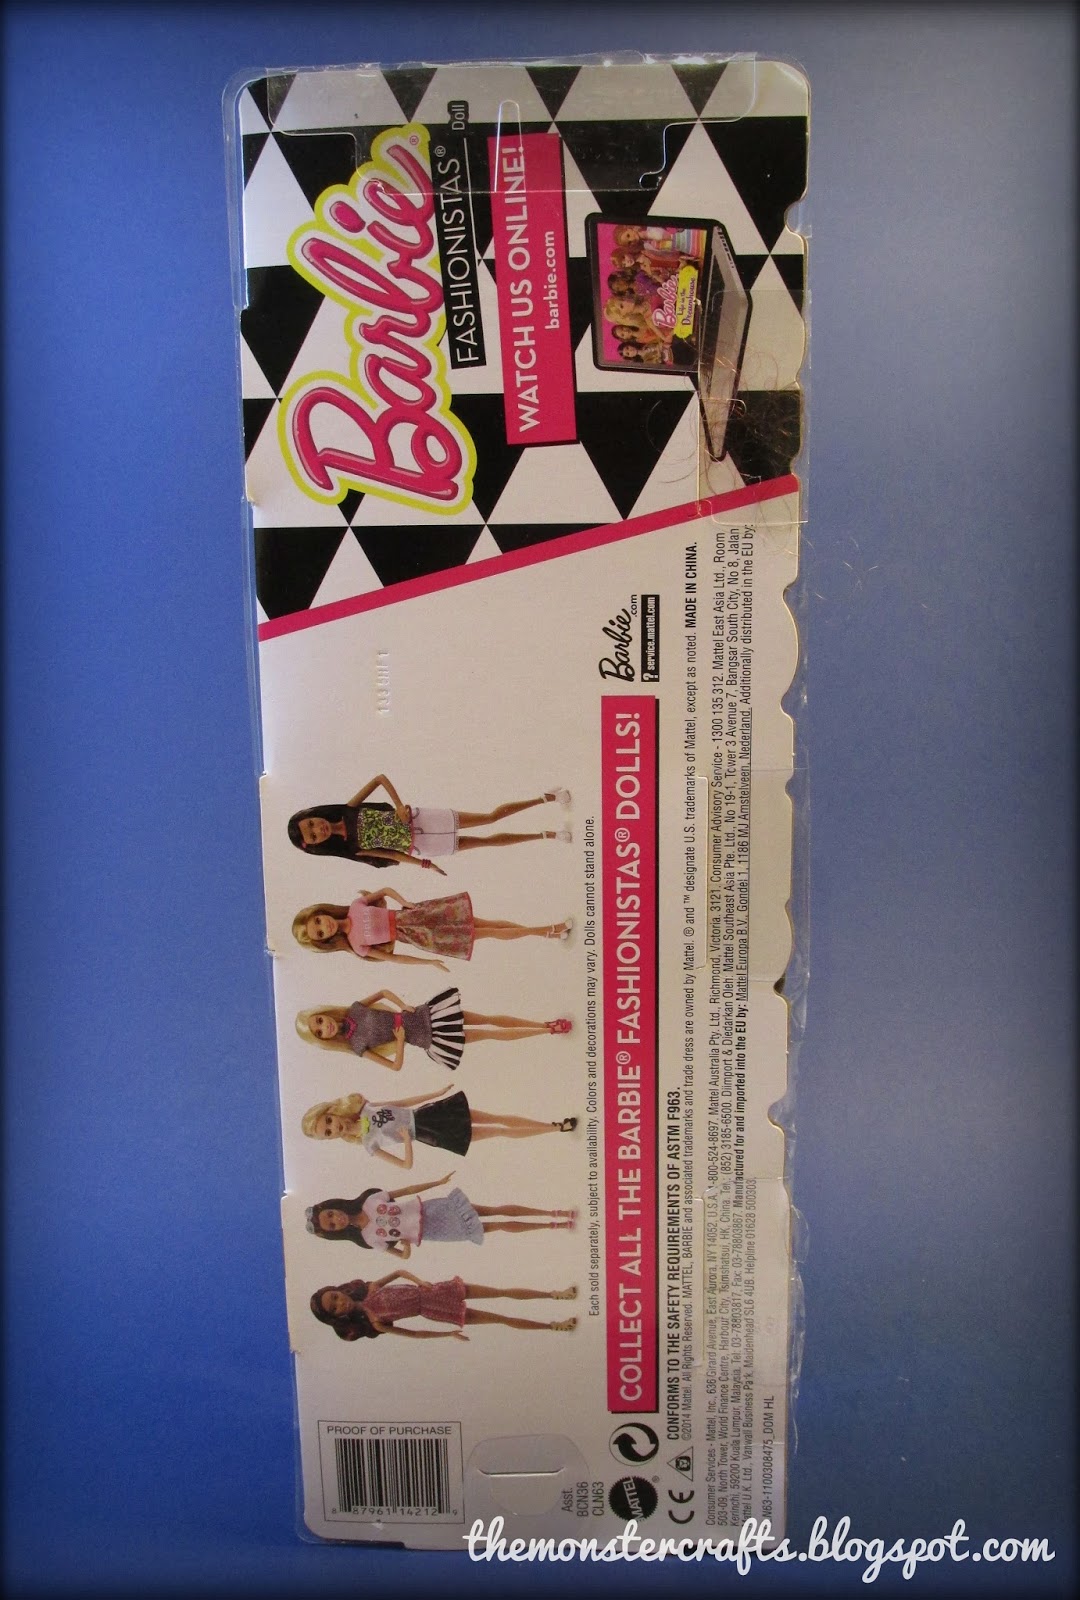 Monster Crafts: Doll Review: Barbie Fashionistas 